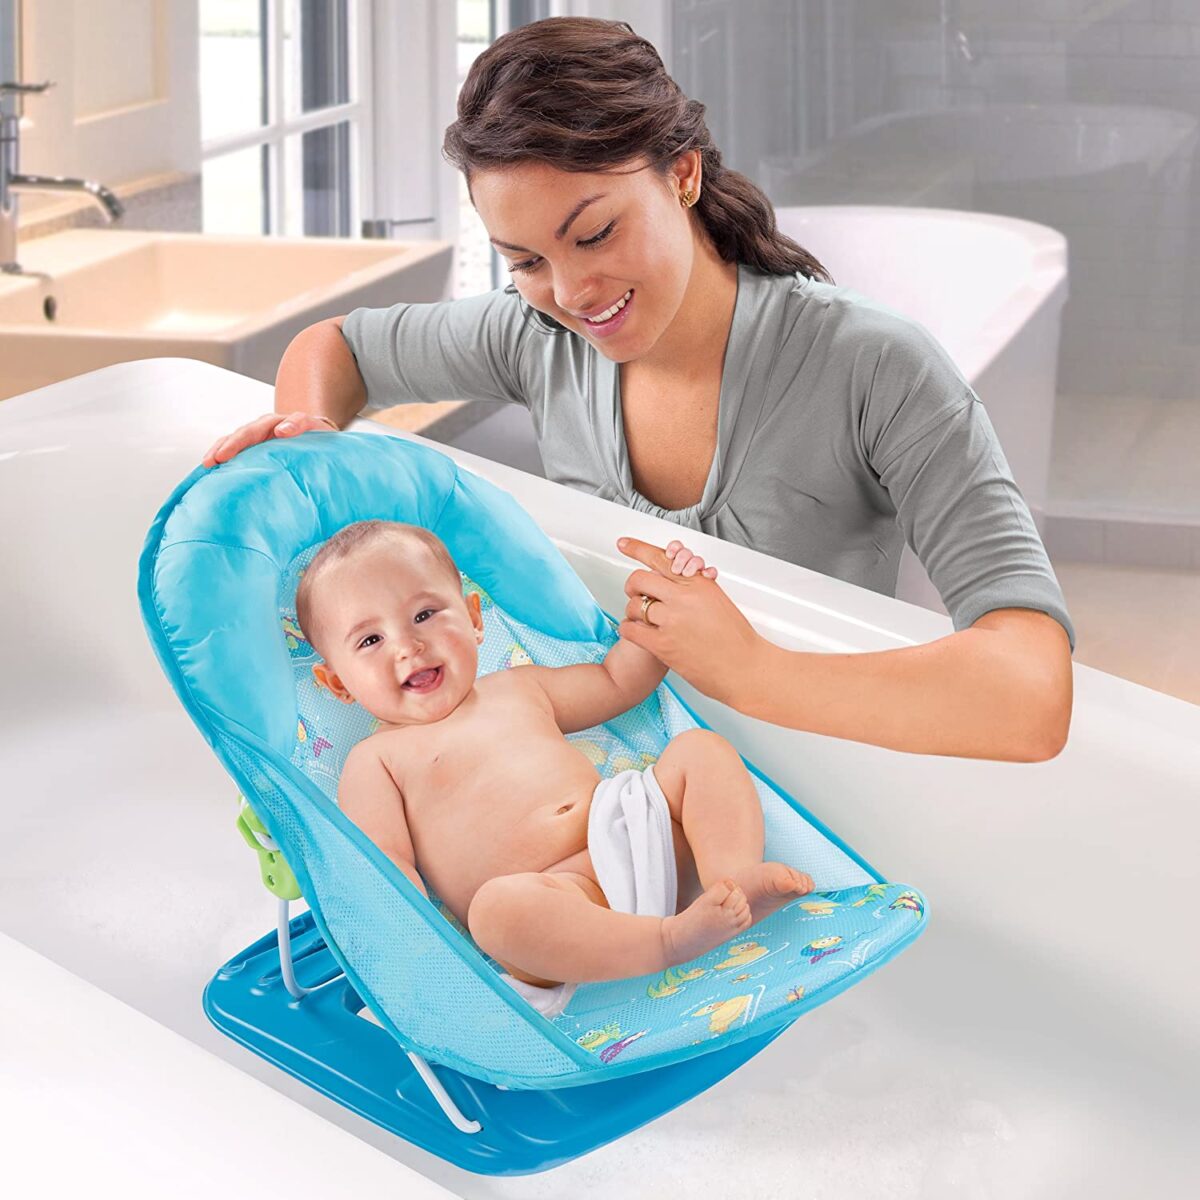 Junior Baby Bather Bath Tub with Removable head cushion & 3 Reclining Position for Ages 0 to 12 months & Carrying Capacity Up to 10kg